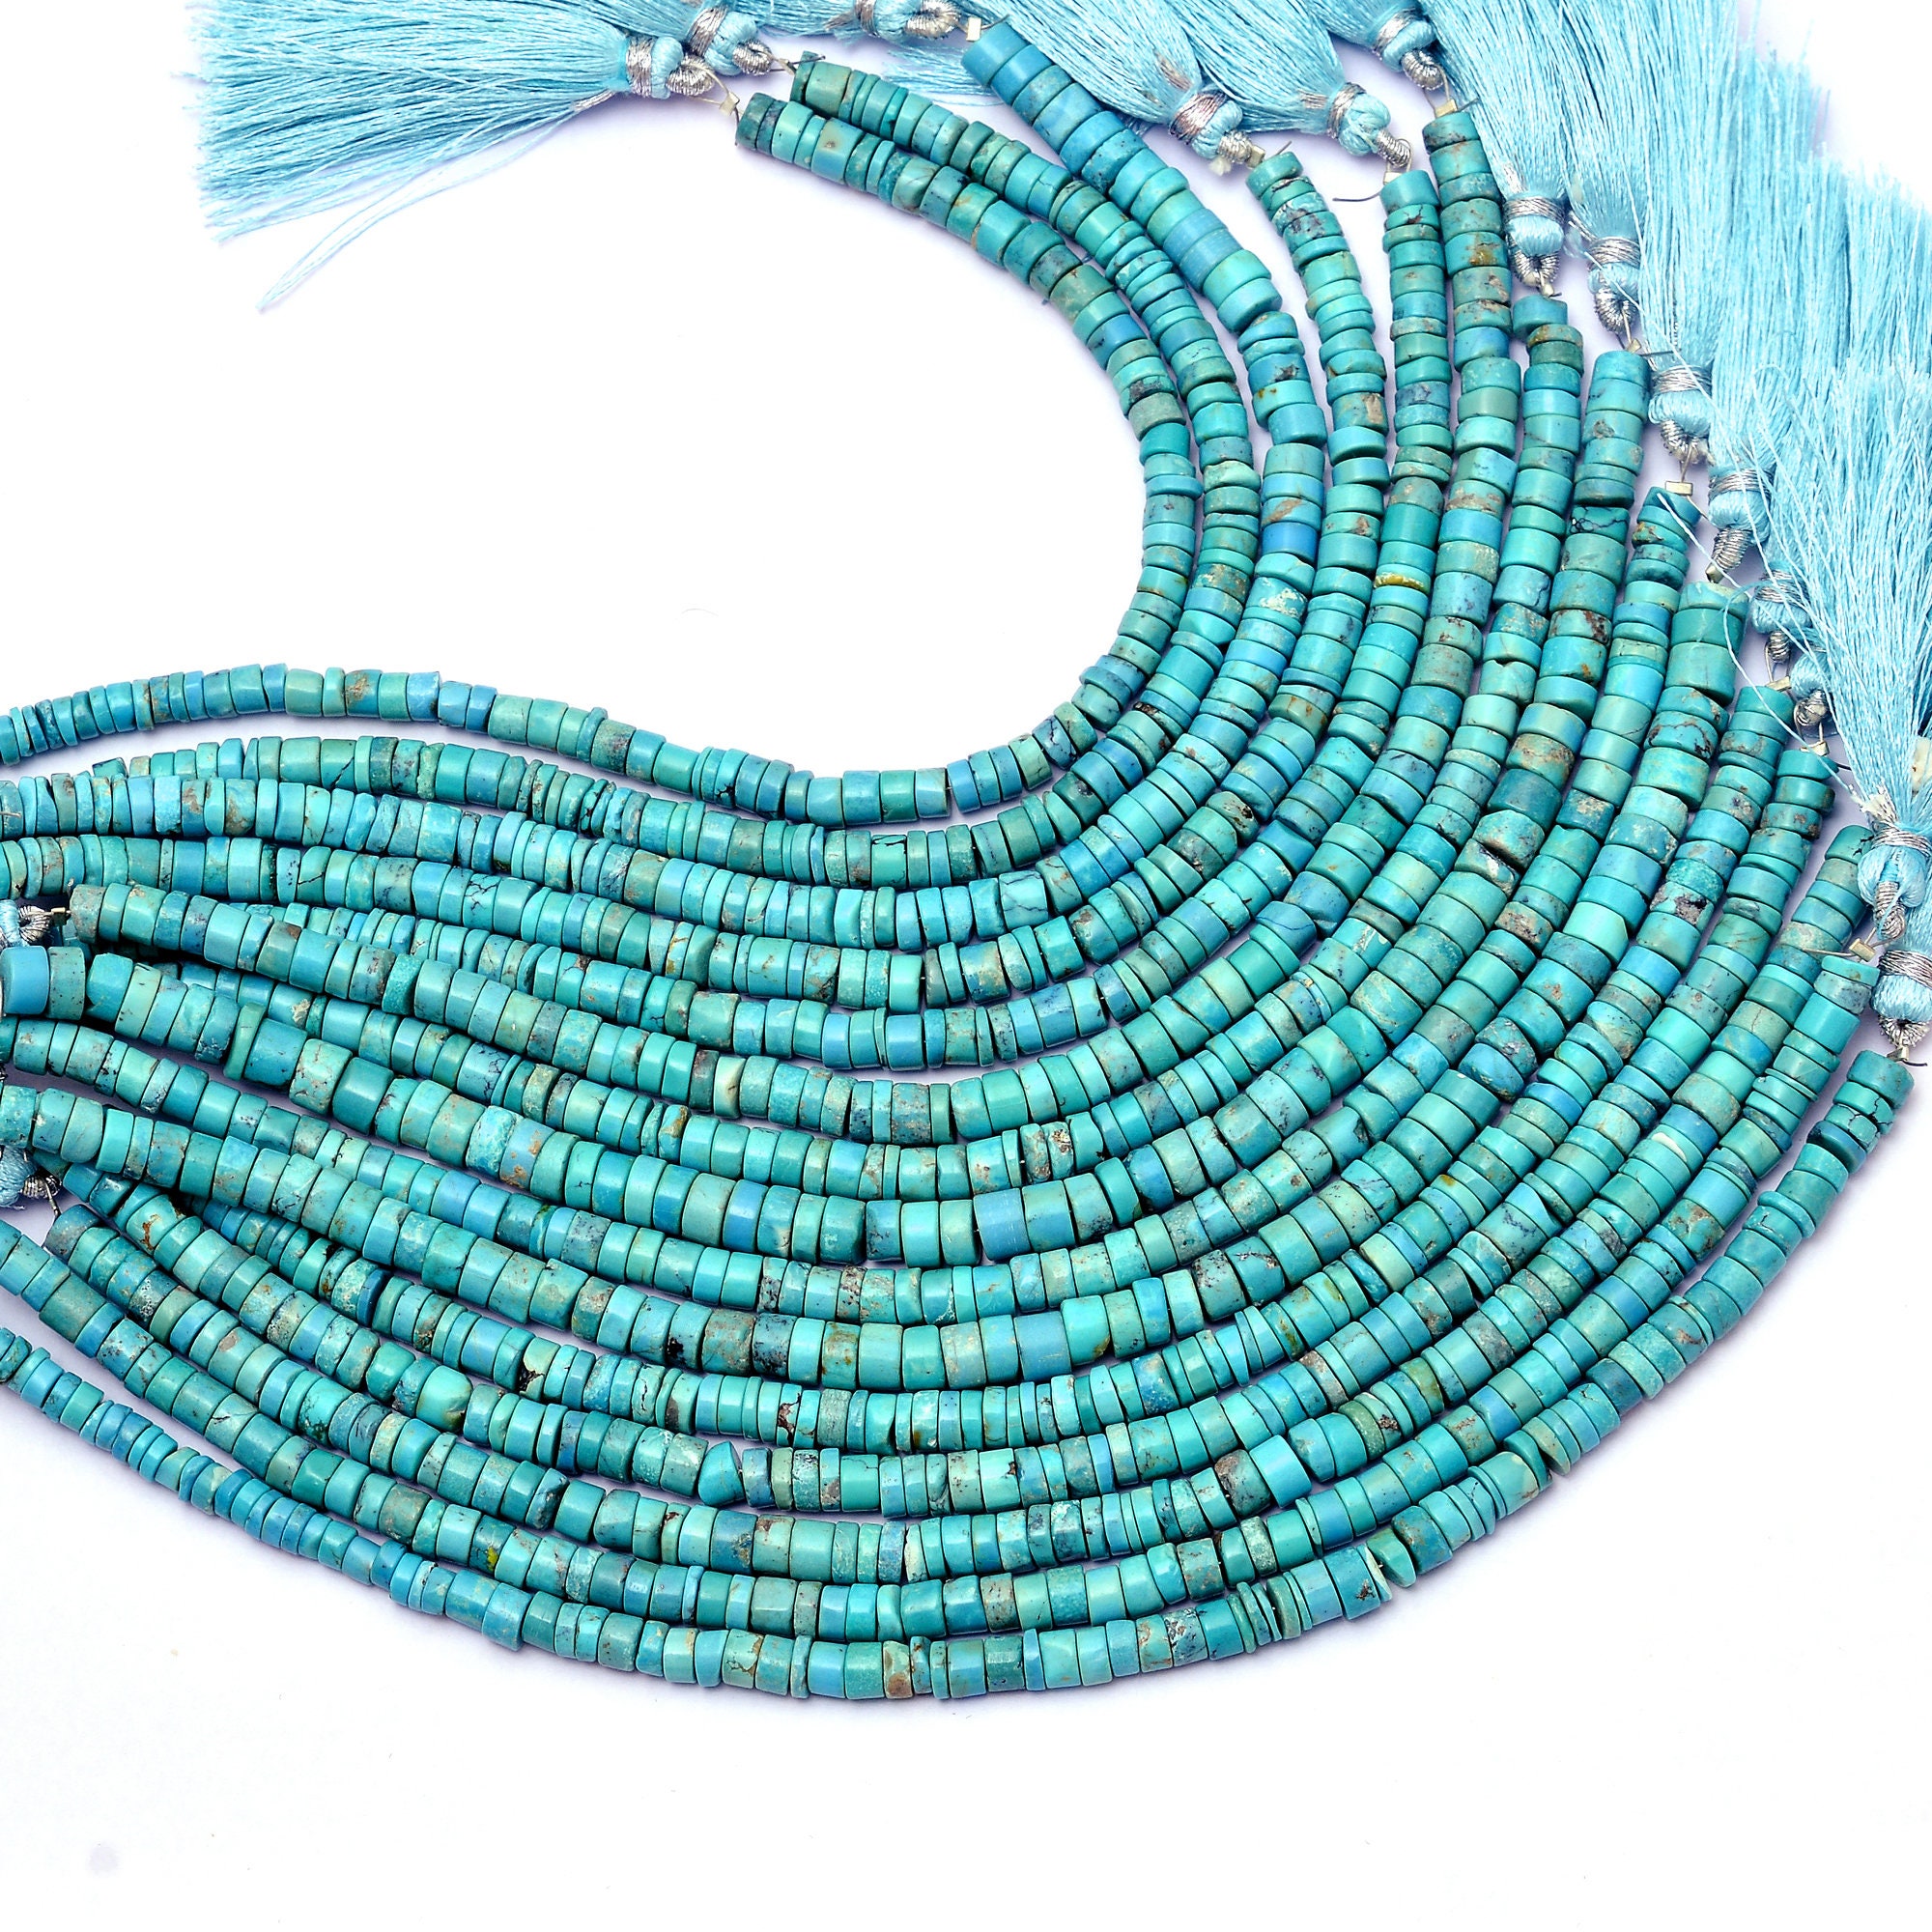 2.25mm Tiny Blue Turquoise Tube Beads Natural Turquoise Beads for